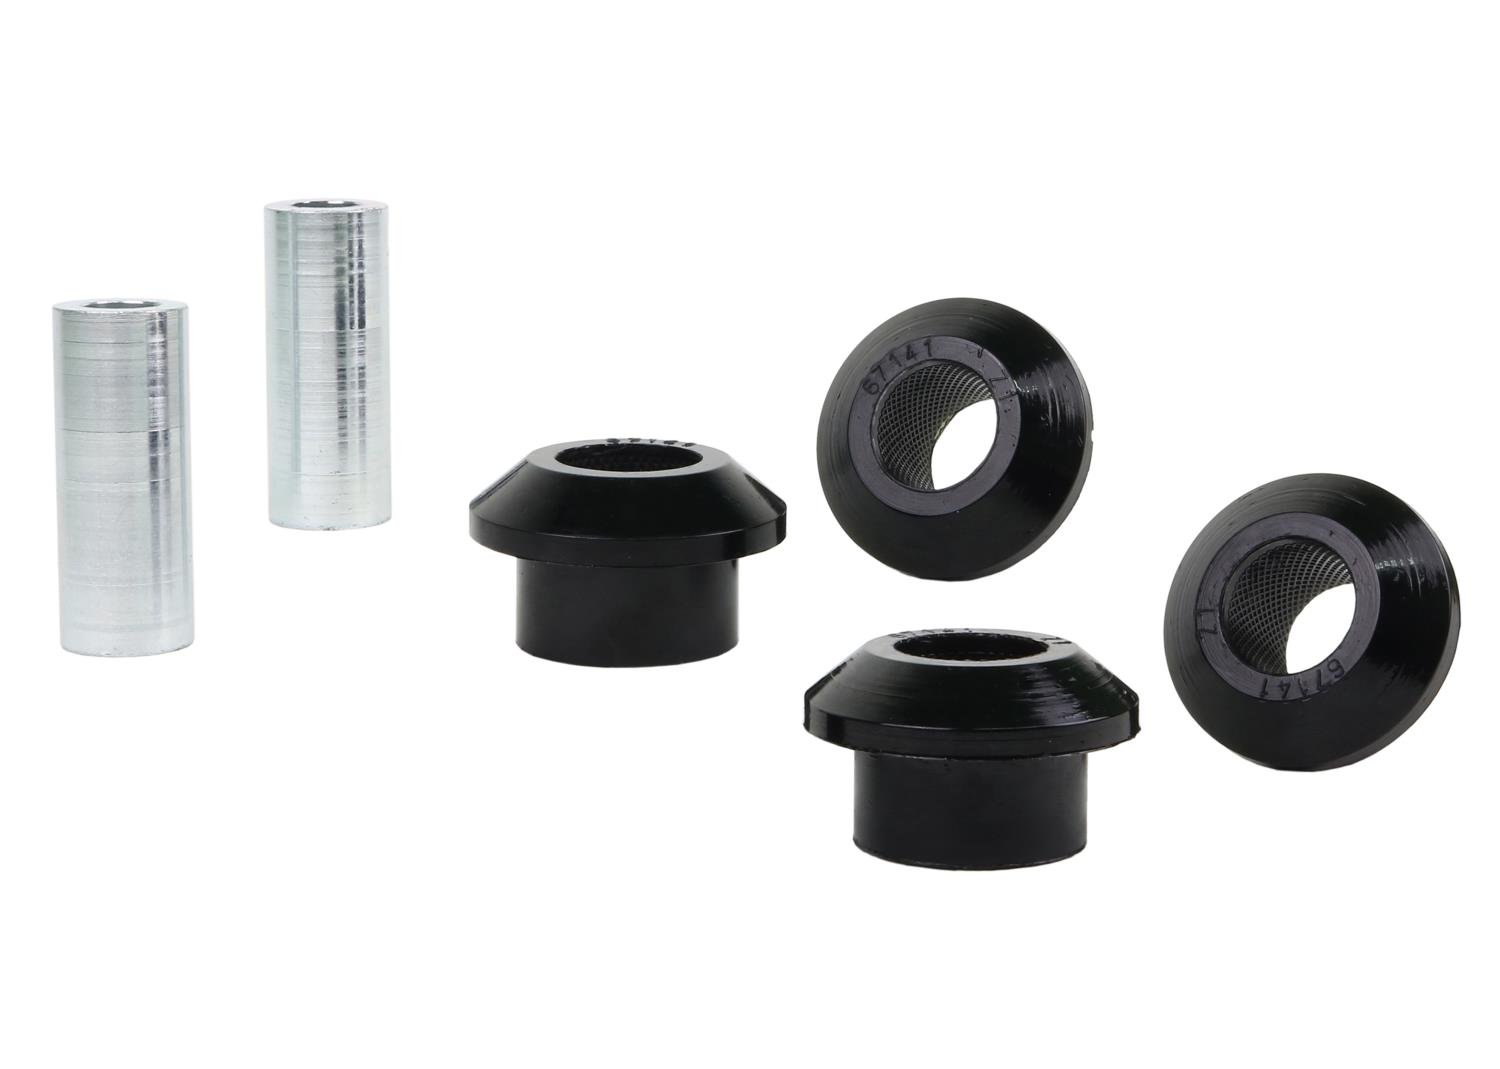 W53286 Front Control Arm Bushing Kit for 2008-2018 Ford Focus, 2004-2008 Mazda 3